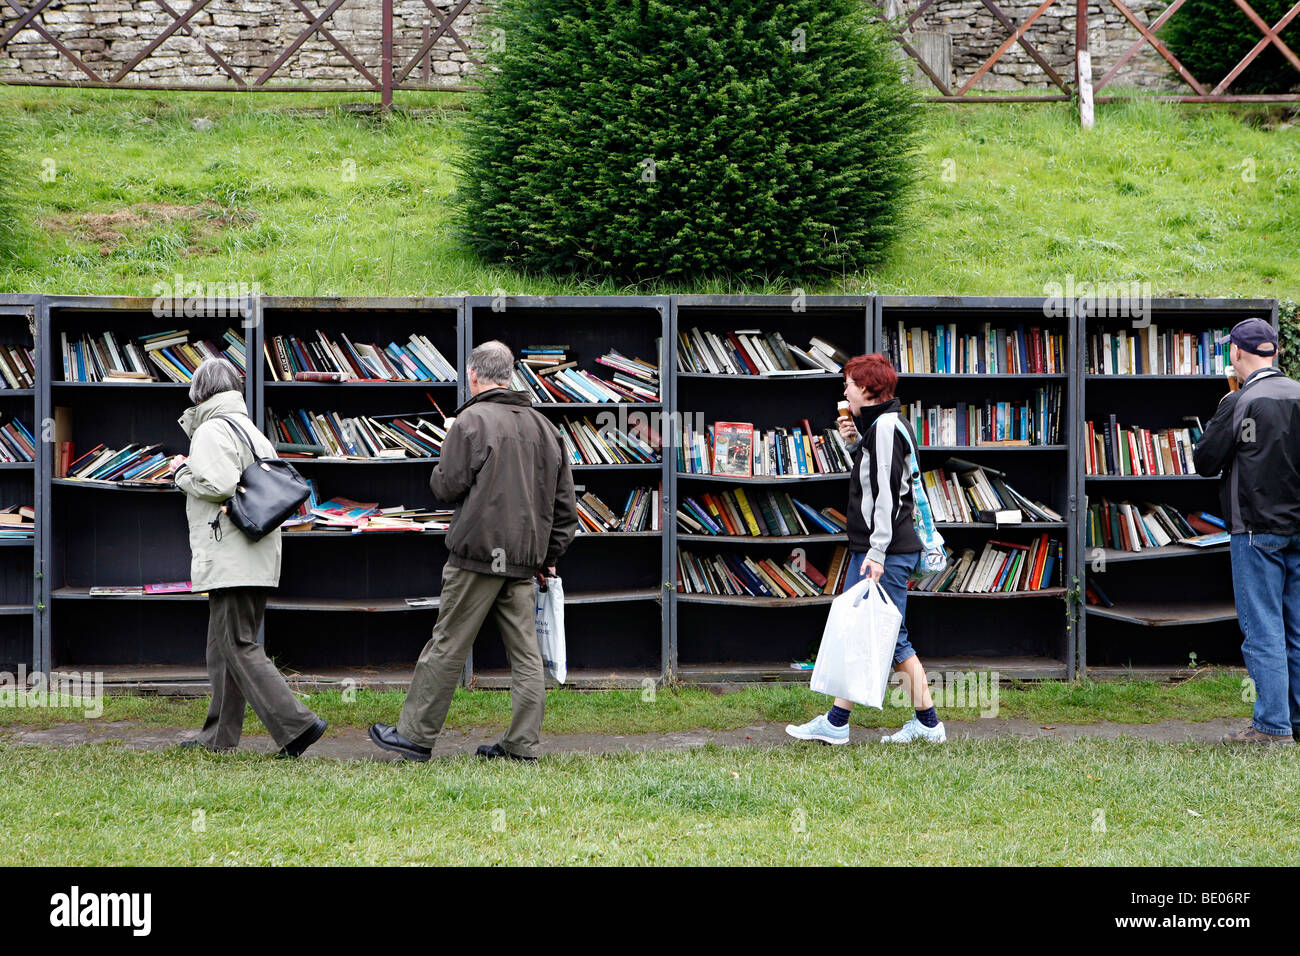 A view of Hay-on-wye's book stalls in the middle of the village. Stock Photo